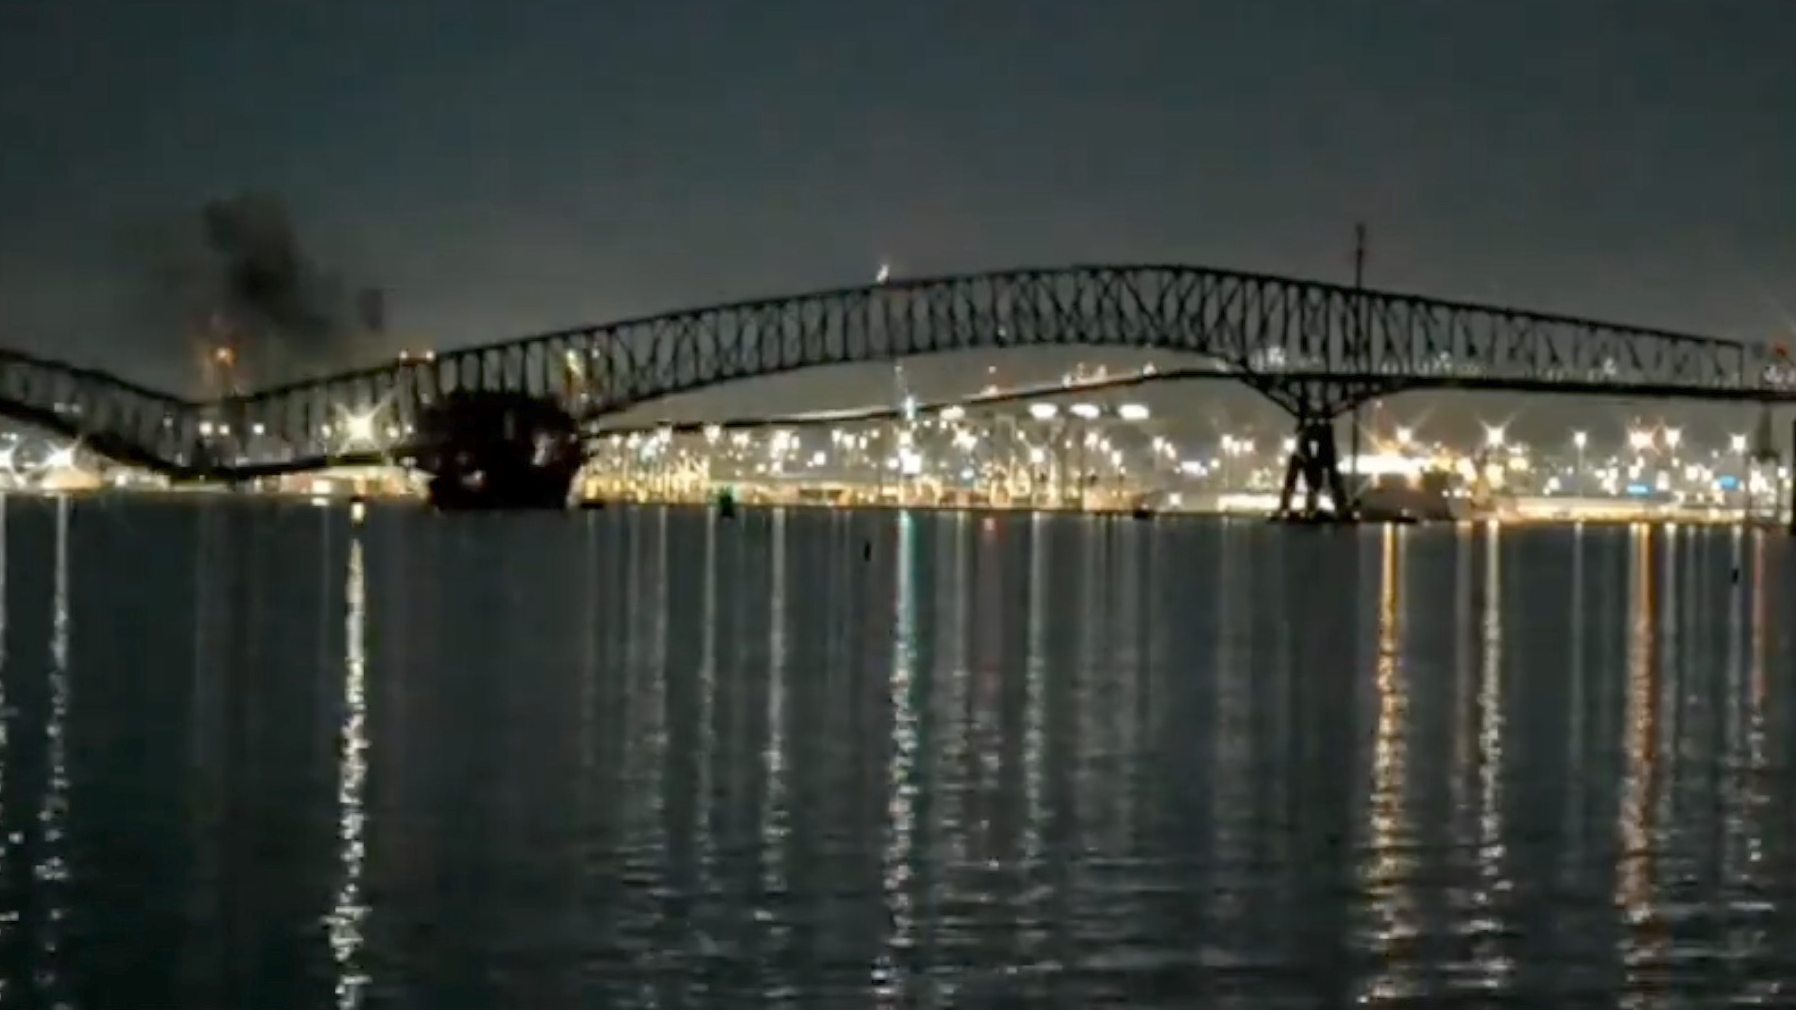 Live: Bridge in U.S. city Baltimore collapses after boat collision